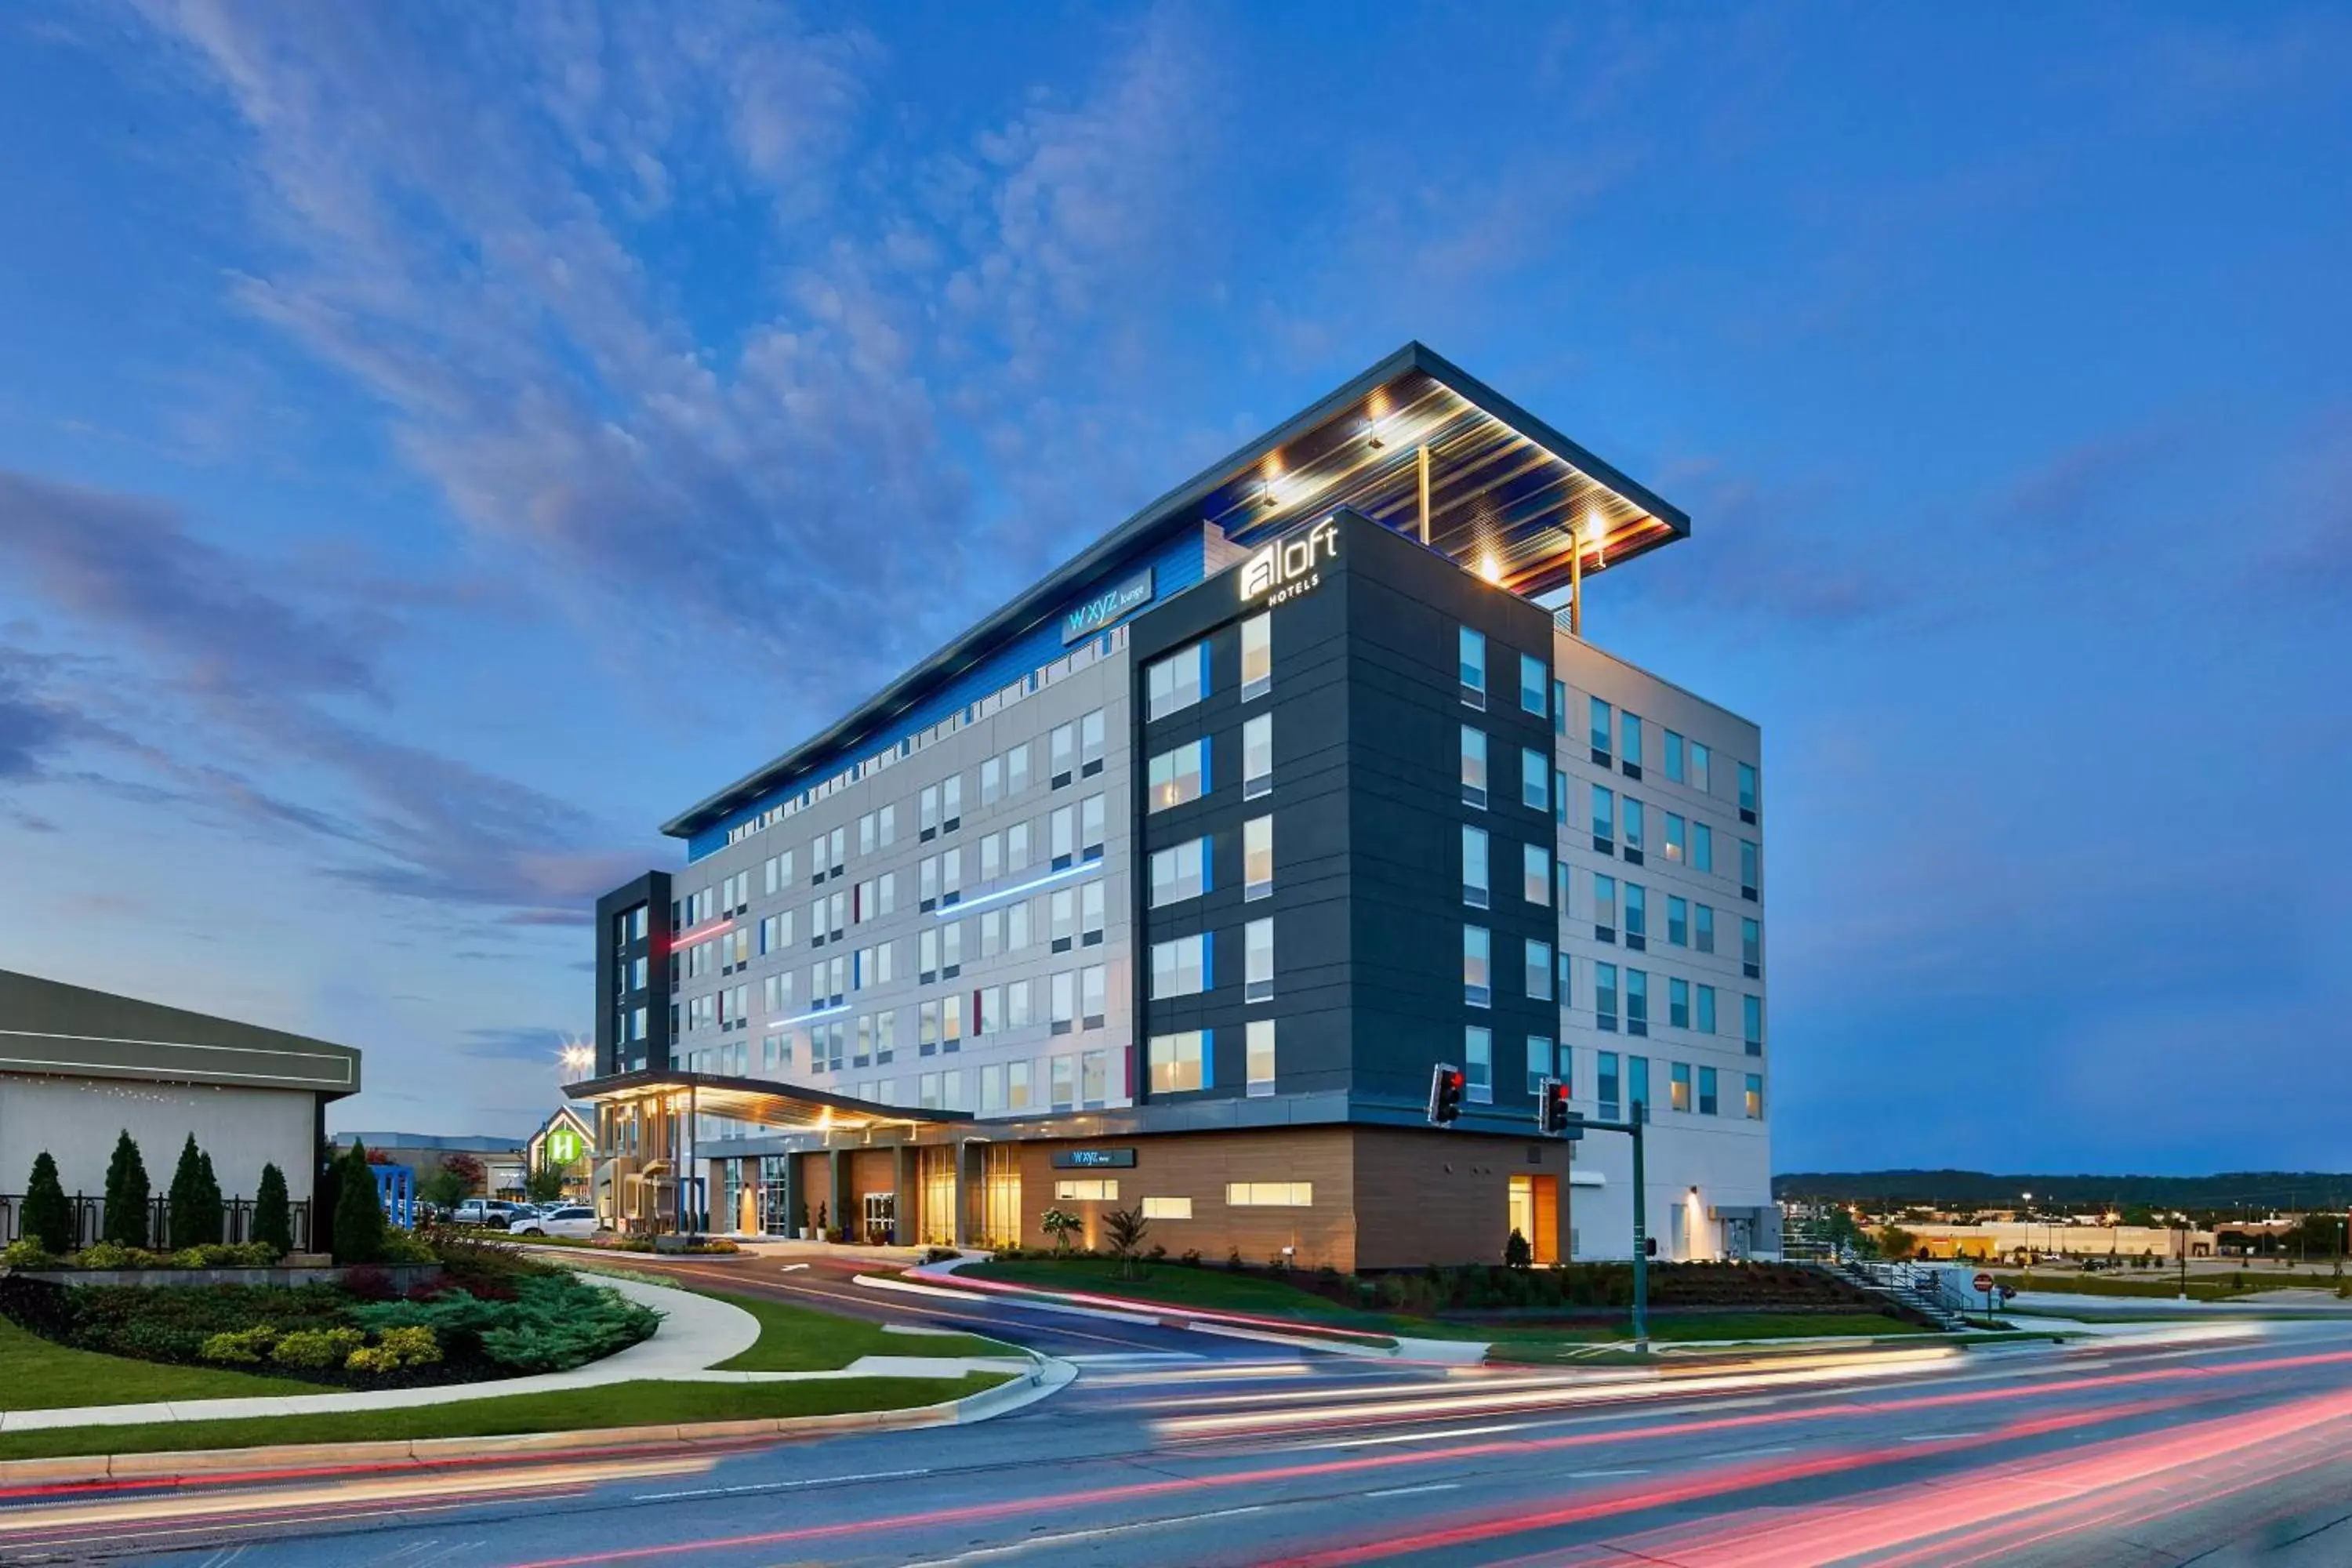 Property Building in Aloft Chattanooga Hamilton Place